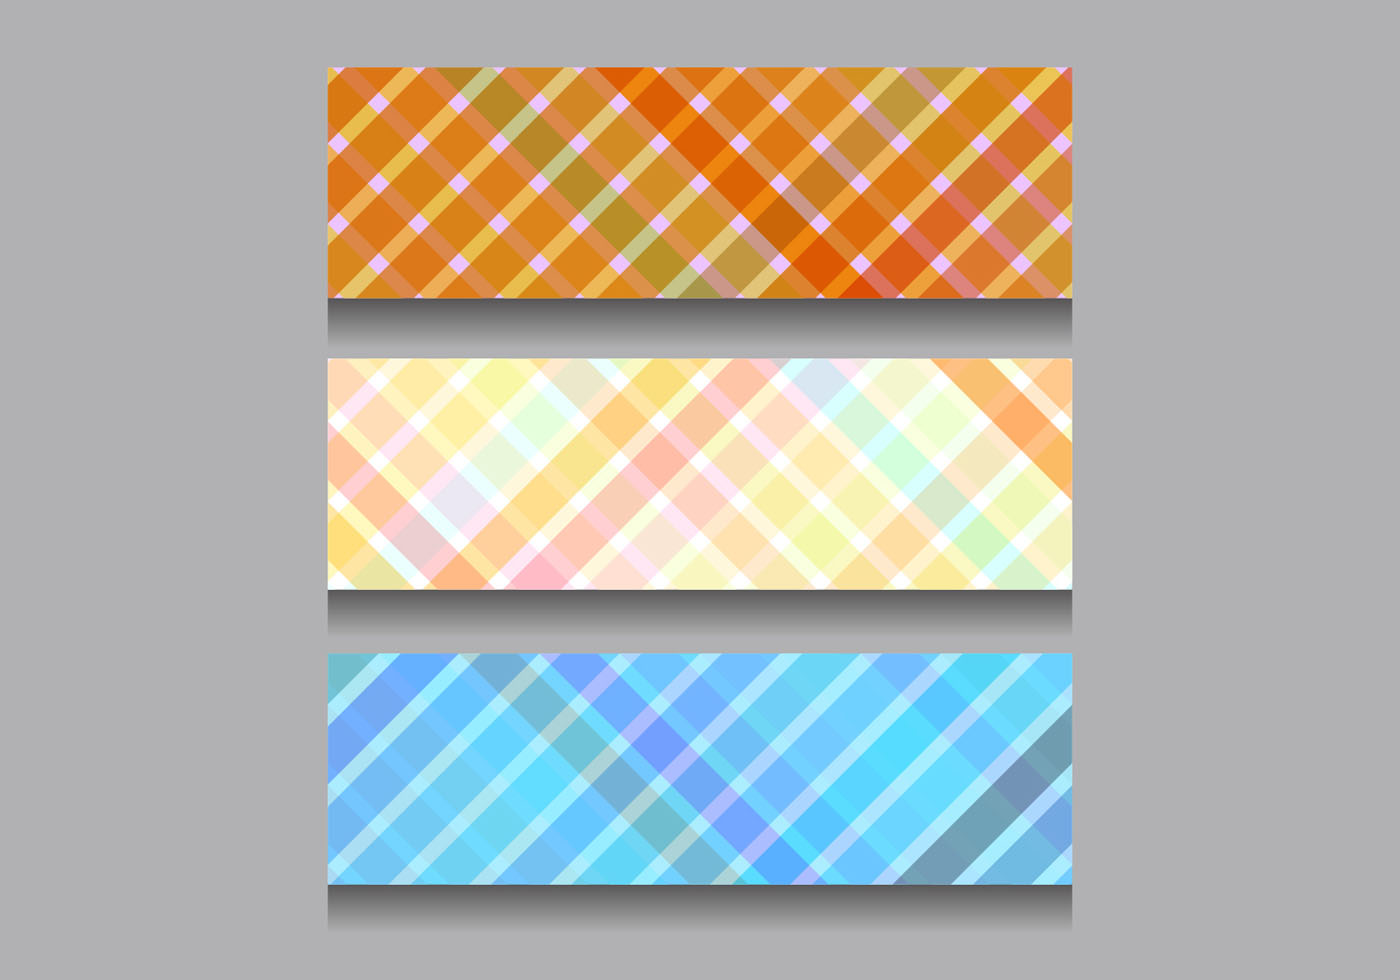 Download Free Vector Colorful Headers - Download Free Vector Art, Stock Graphics & Images